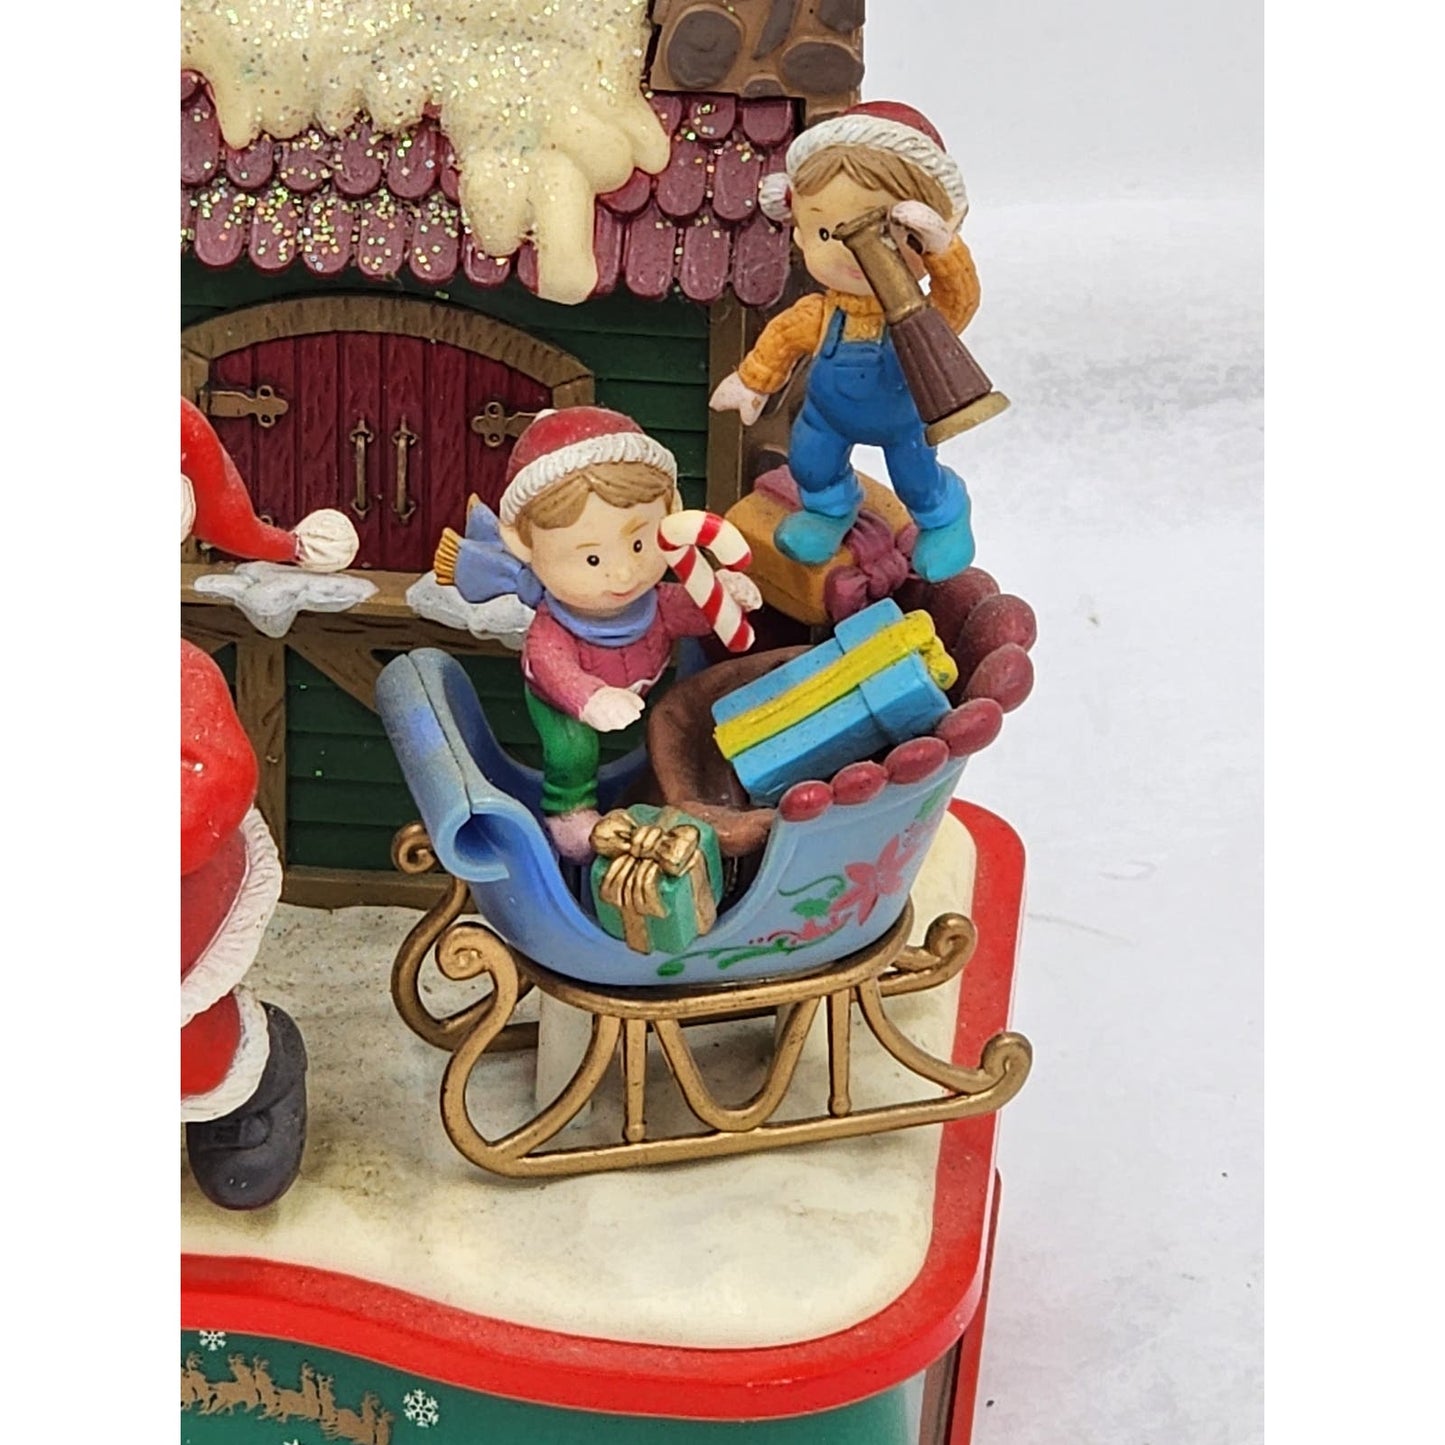 Lustre Fame Santa Claus Coming To Town Animated Music Box Holiday Vintage 1995